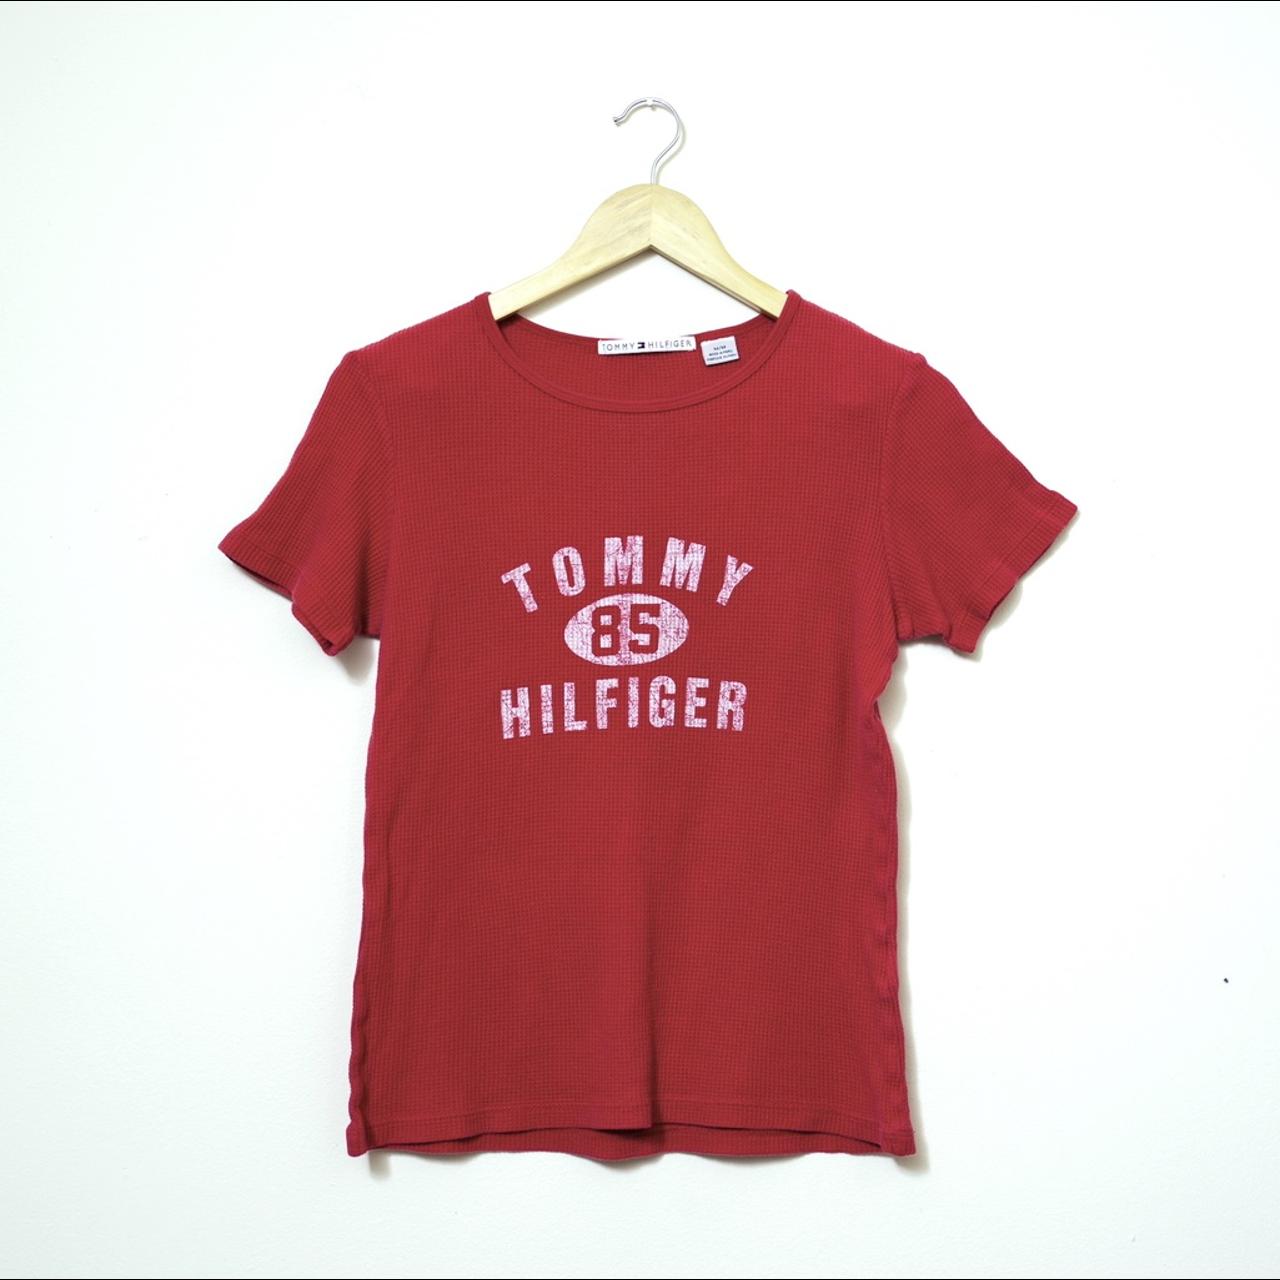 Tommy Hilfiger Women's Red and White T-shirt